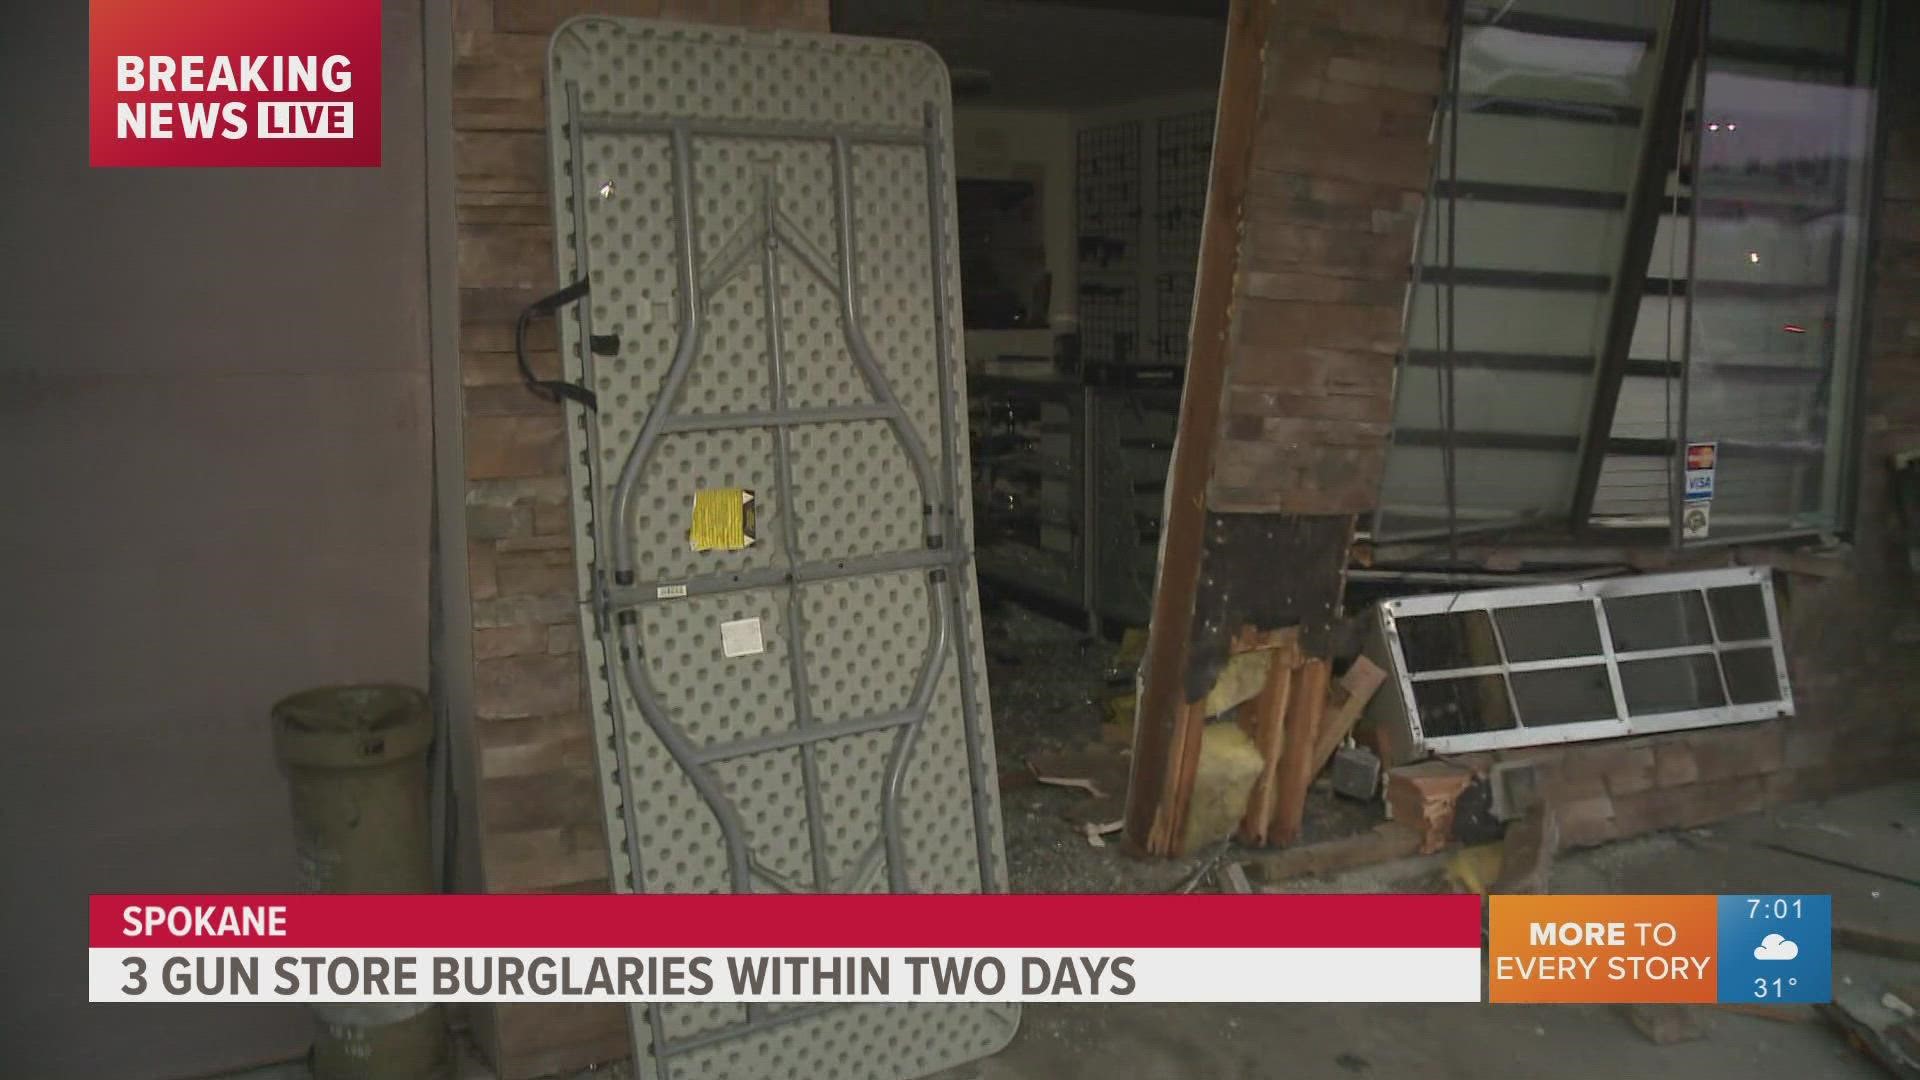 Police said there have been three break-ins over the past two days with multiple firearms taken.